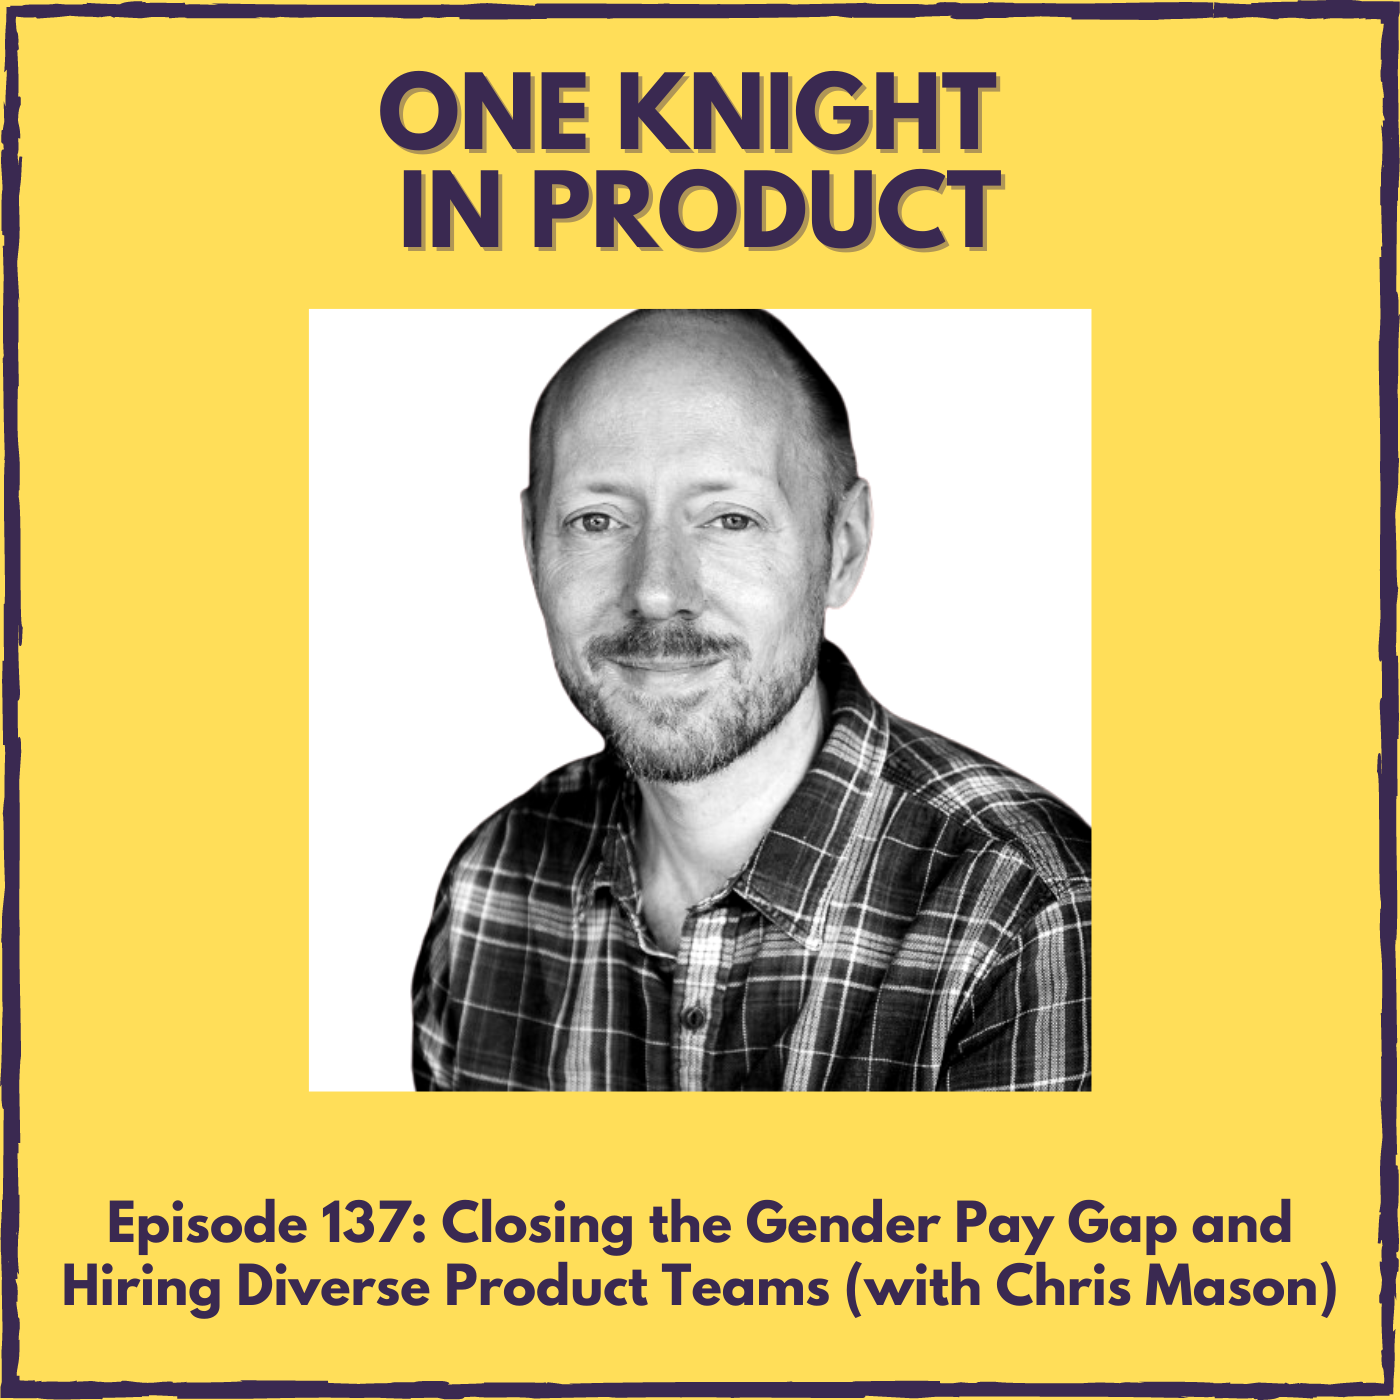 Closing the Gender Pay Gap and Hiring Diverse Product Teams (with Chris Mason, Co-Founder @ Intelligent People)